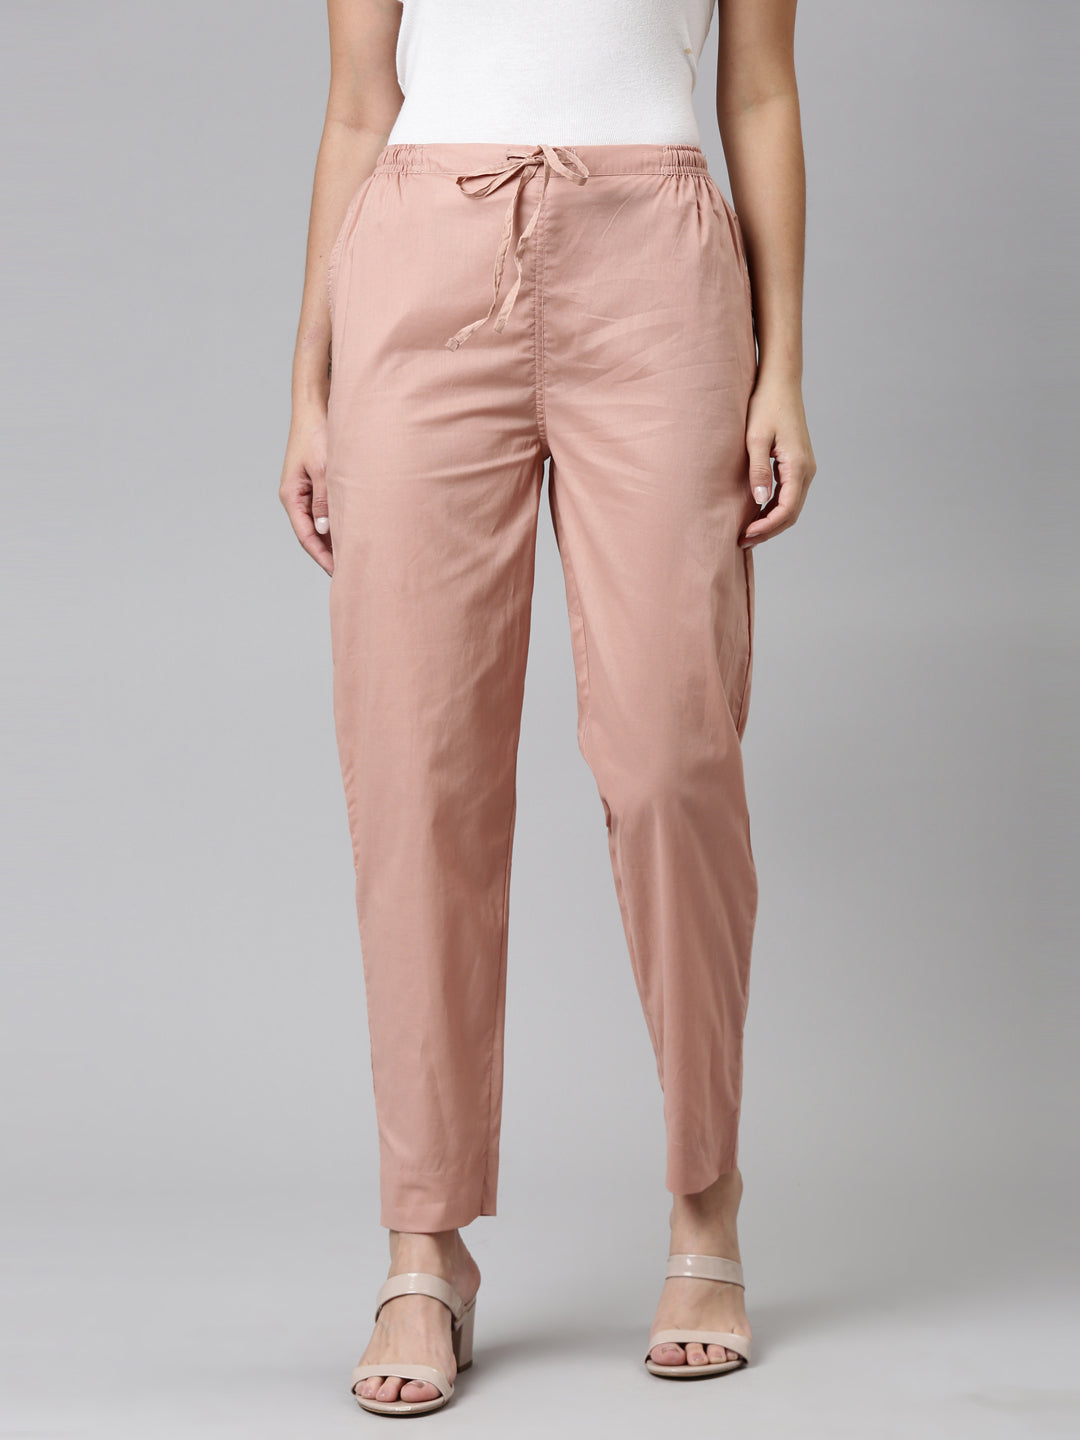 Buy Vasavi Women Pink Slim fit Cigarette pants Online at Low Prices in  India - Paytmmall.com